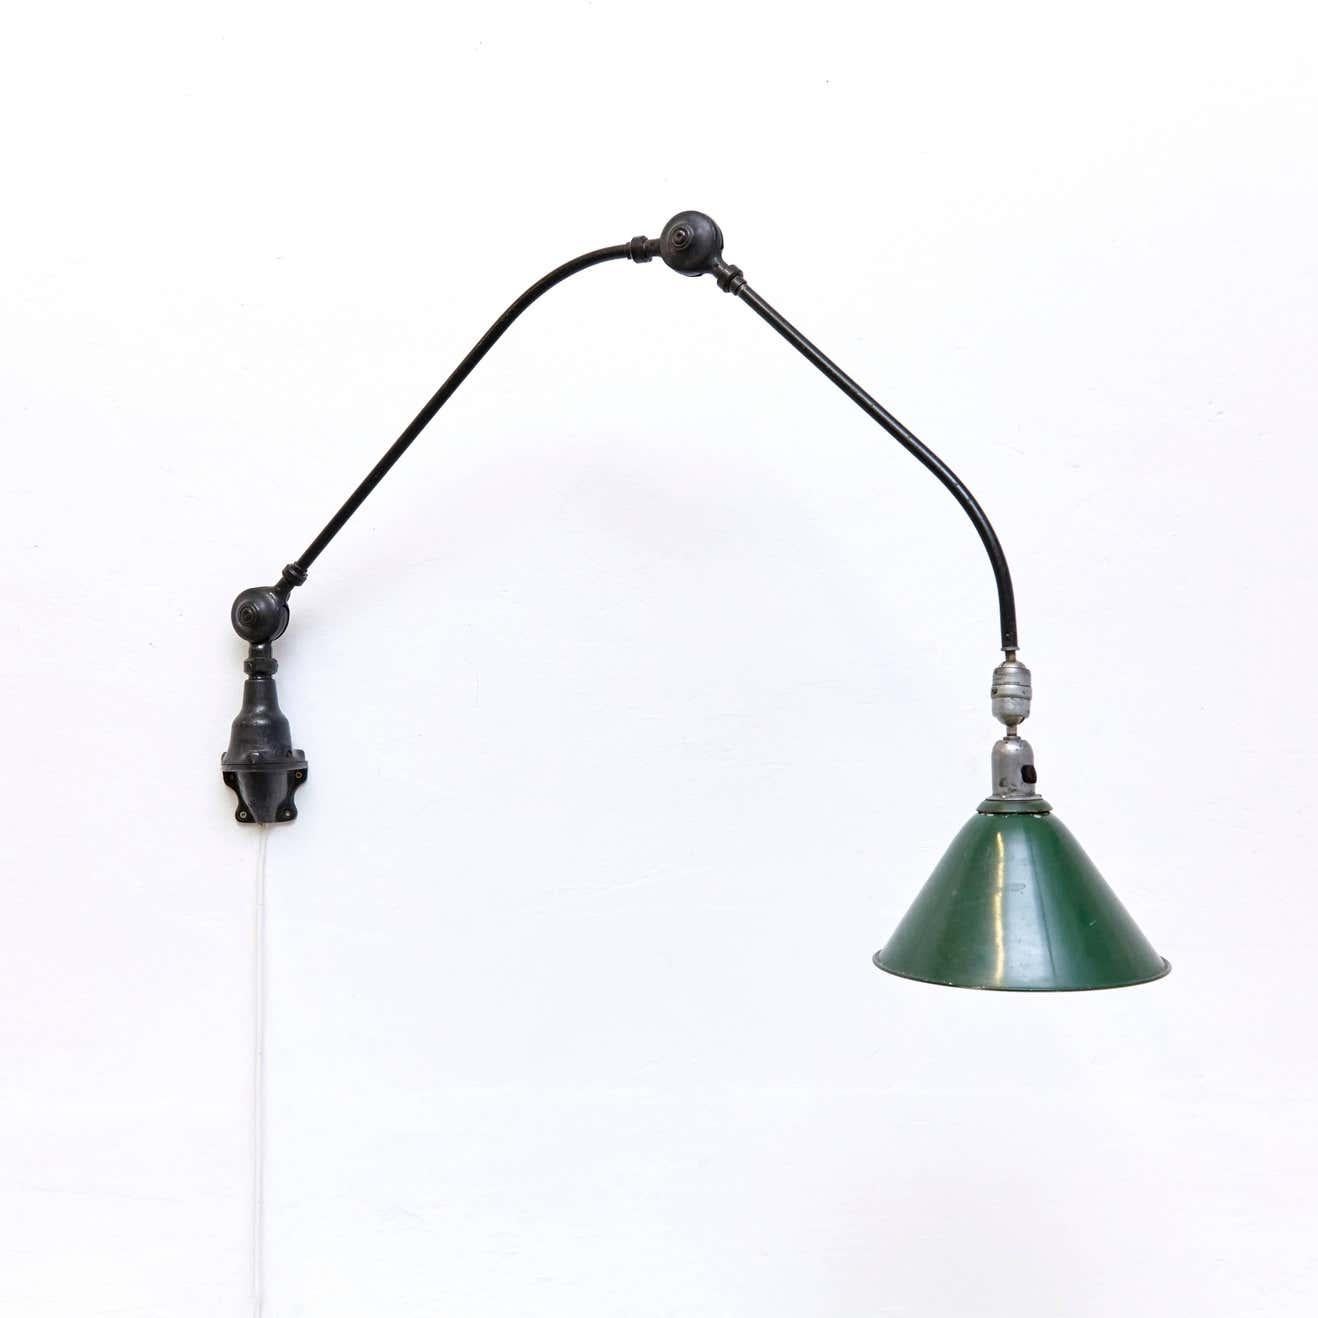 Wall lamp designed by Johan Petter Johansson.
Manufactured by Triplex (Sweden), circa 1930.
Aluminium and steel.

Measures: Height 94 x width 123 cm, 26.5 diameter

In good original condition, with minor wear consistent with age and use,